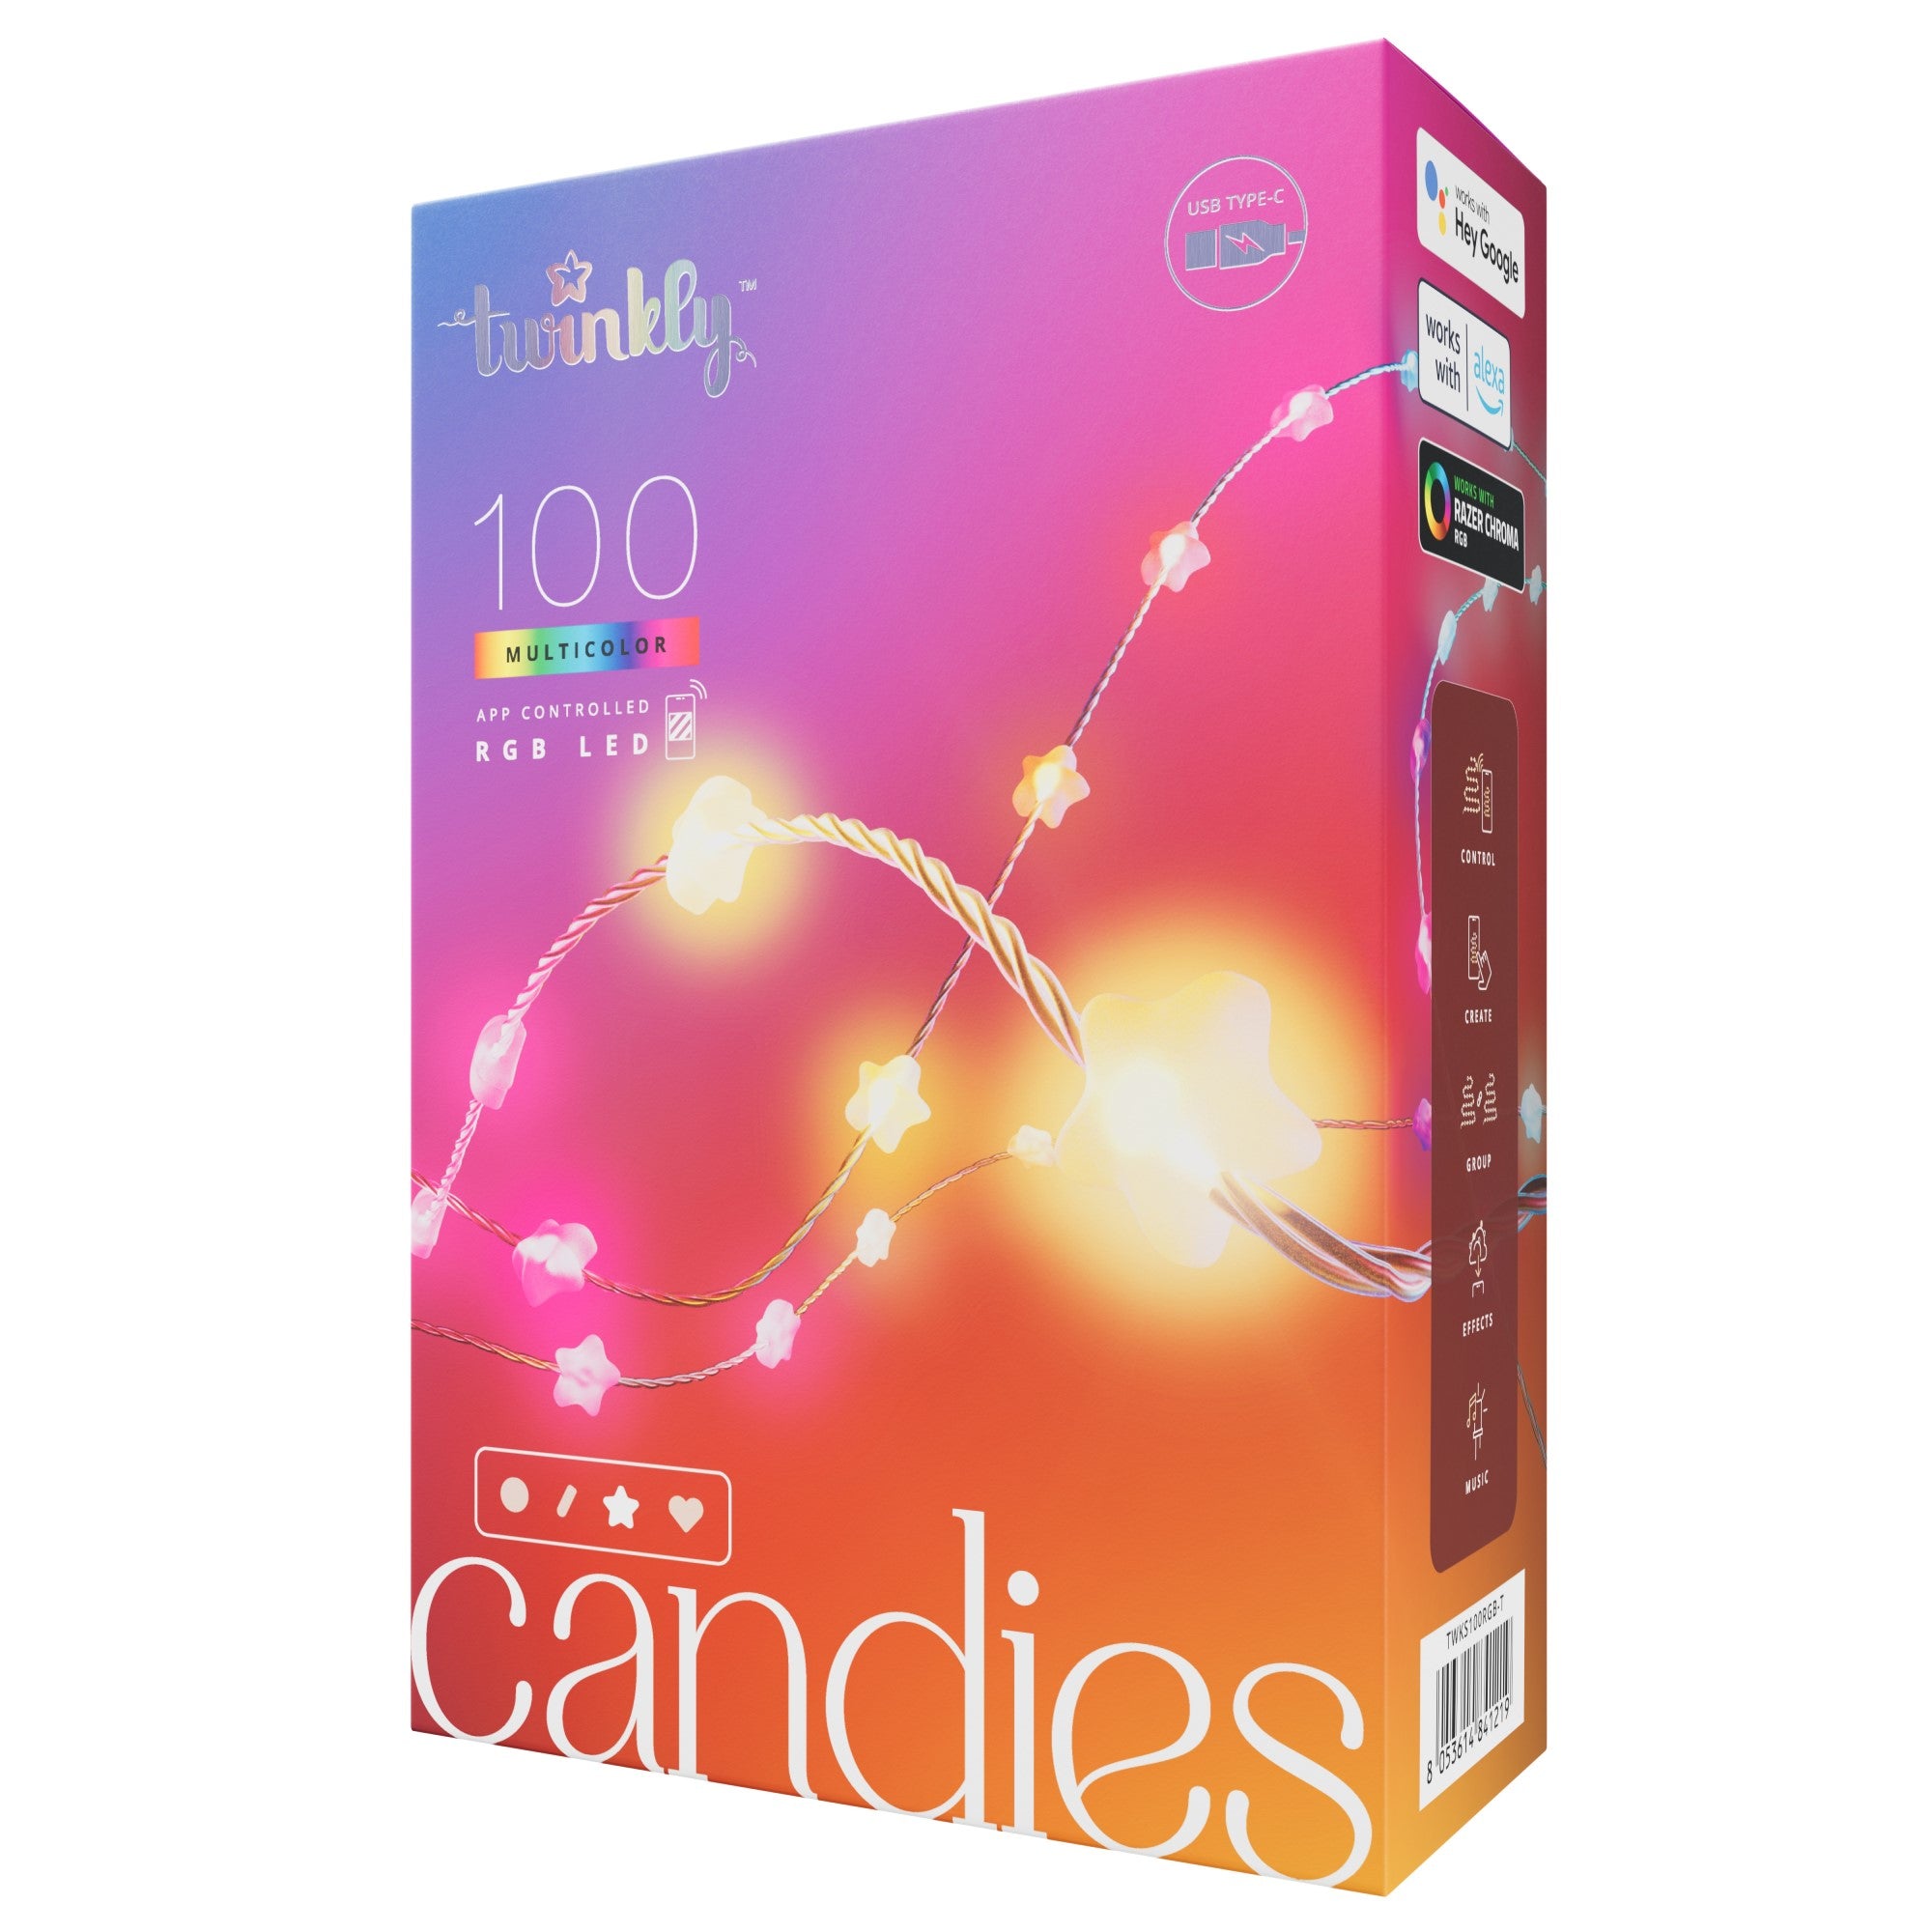 Twinkly Candies LED fairy lights RGB app controlled heart shape 100 LEDs